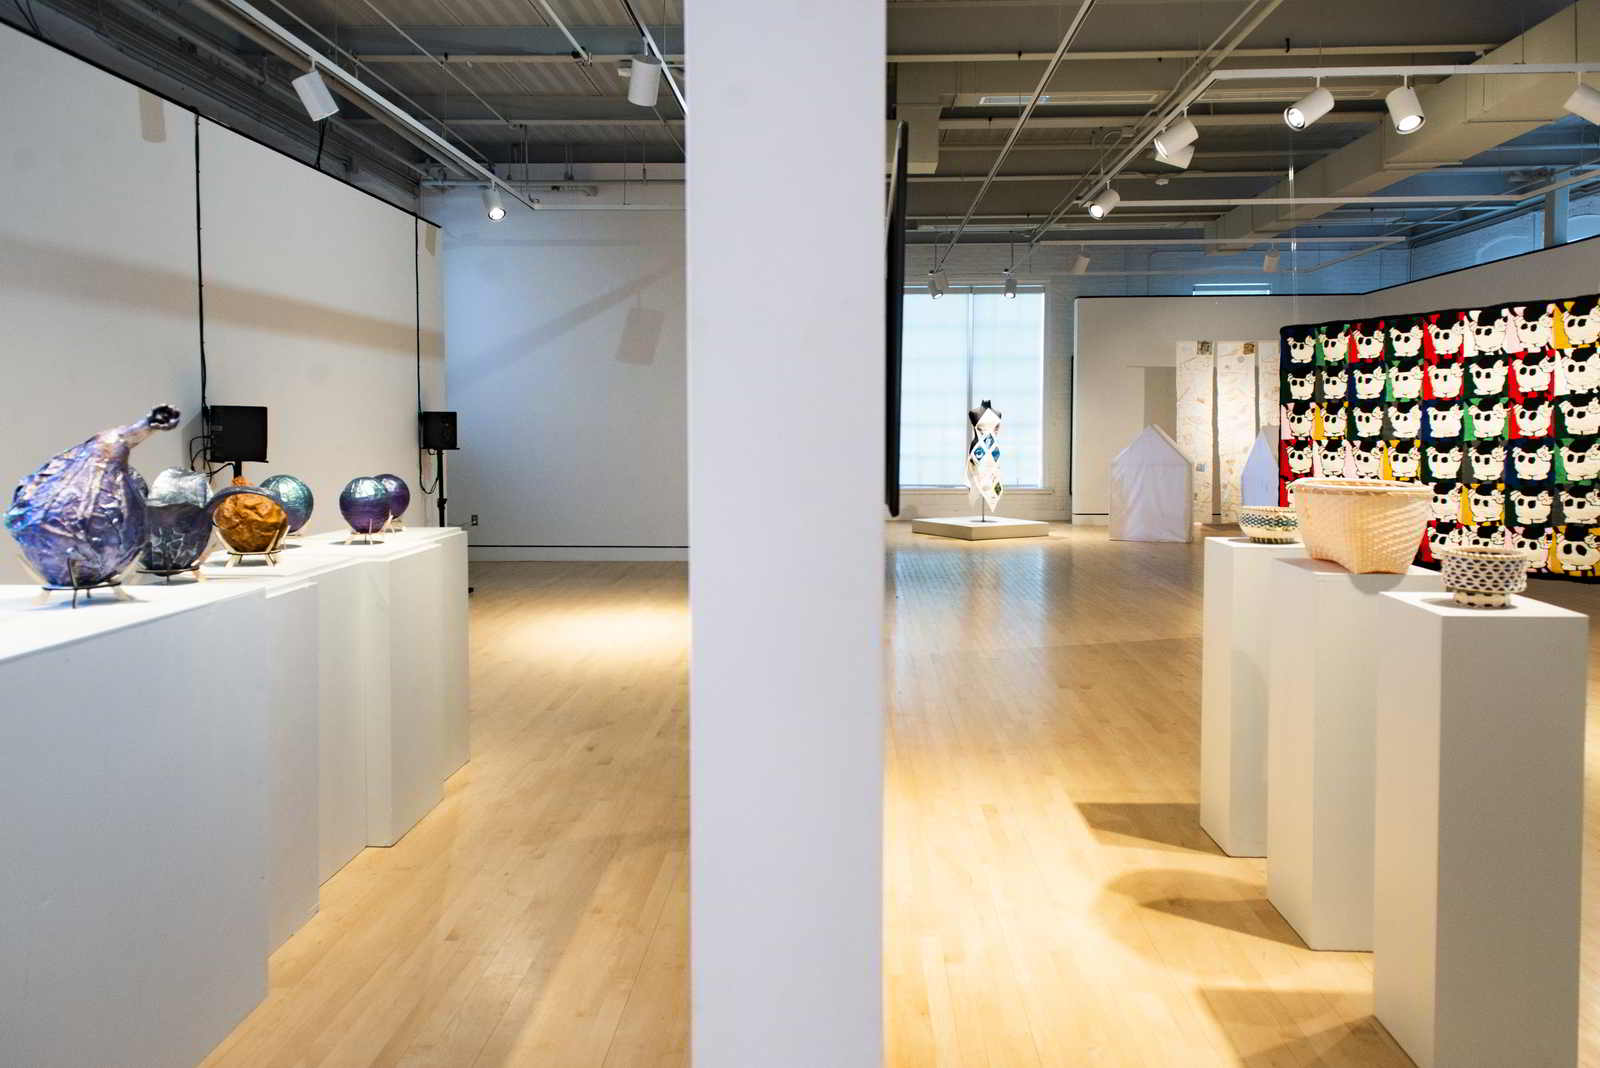 A photo of the empty Lord Hall Gallery with all 2022 MFA thesis projects visible. On the left hand side, purple spherical shapes and an empty space surrounded by black speakers can be seen. On the right, baskets, a dress, houses, and a hanging rug can be seen.  